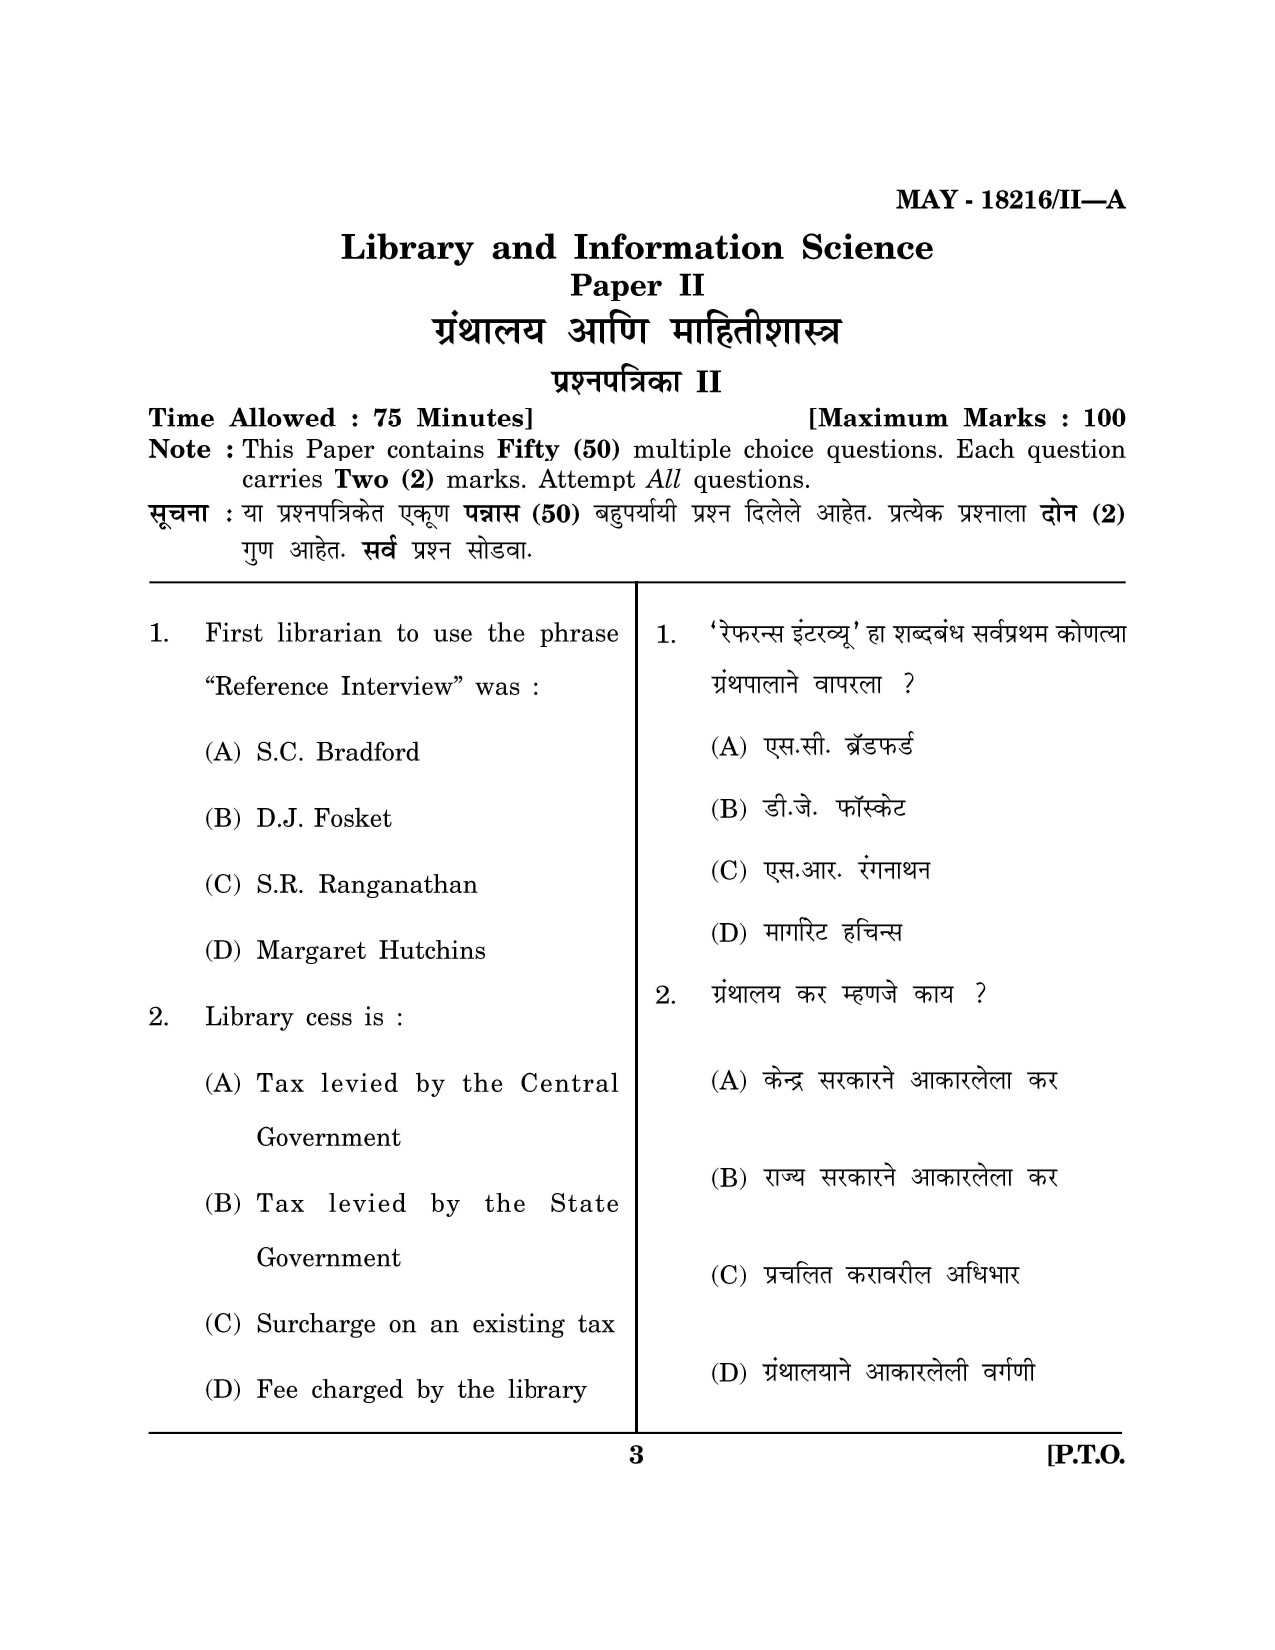 Maharashtra SET Library Information Science Question Paper II May 2016 2